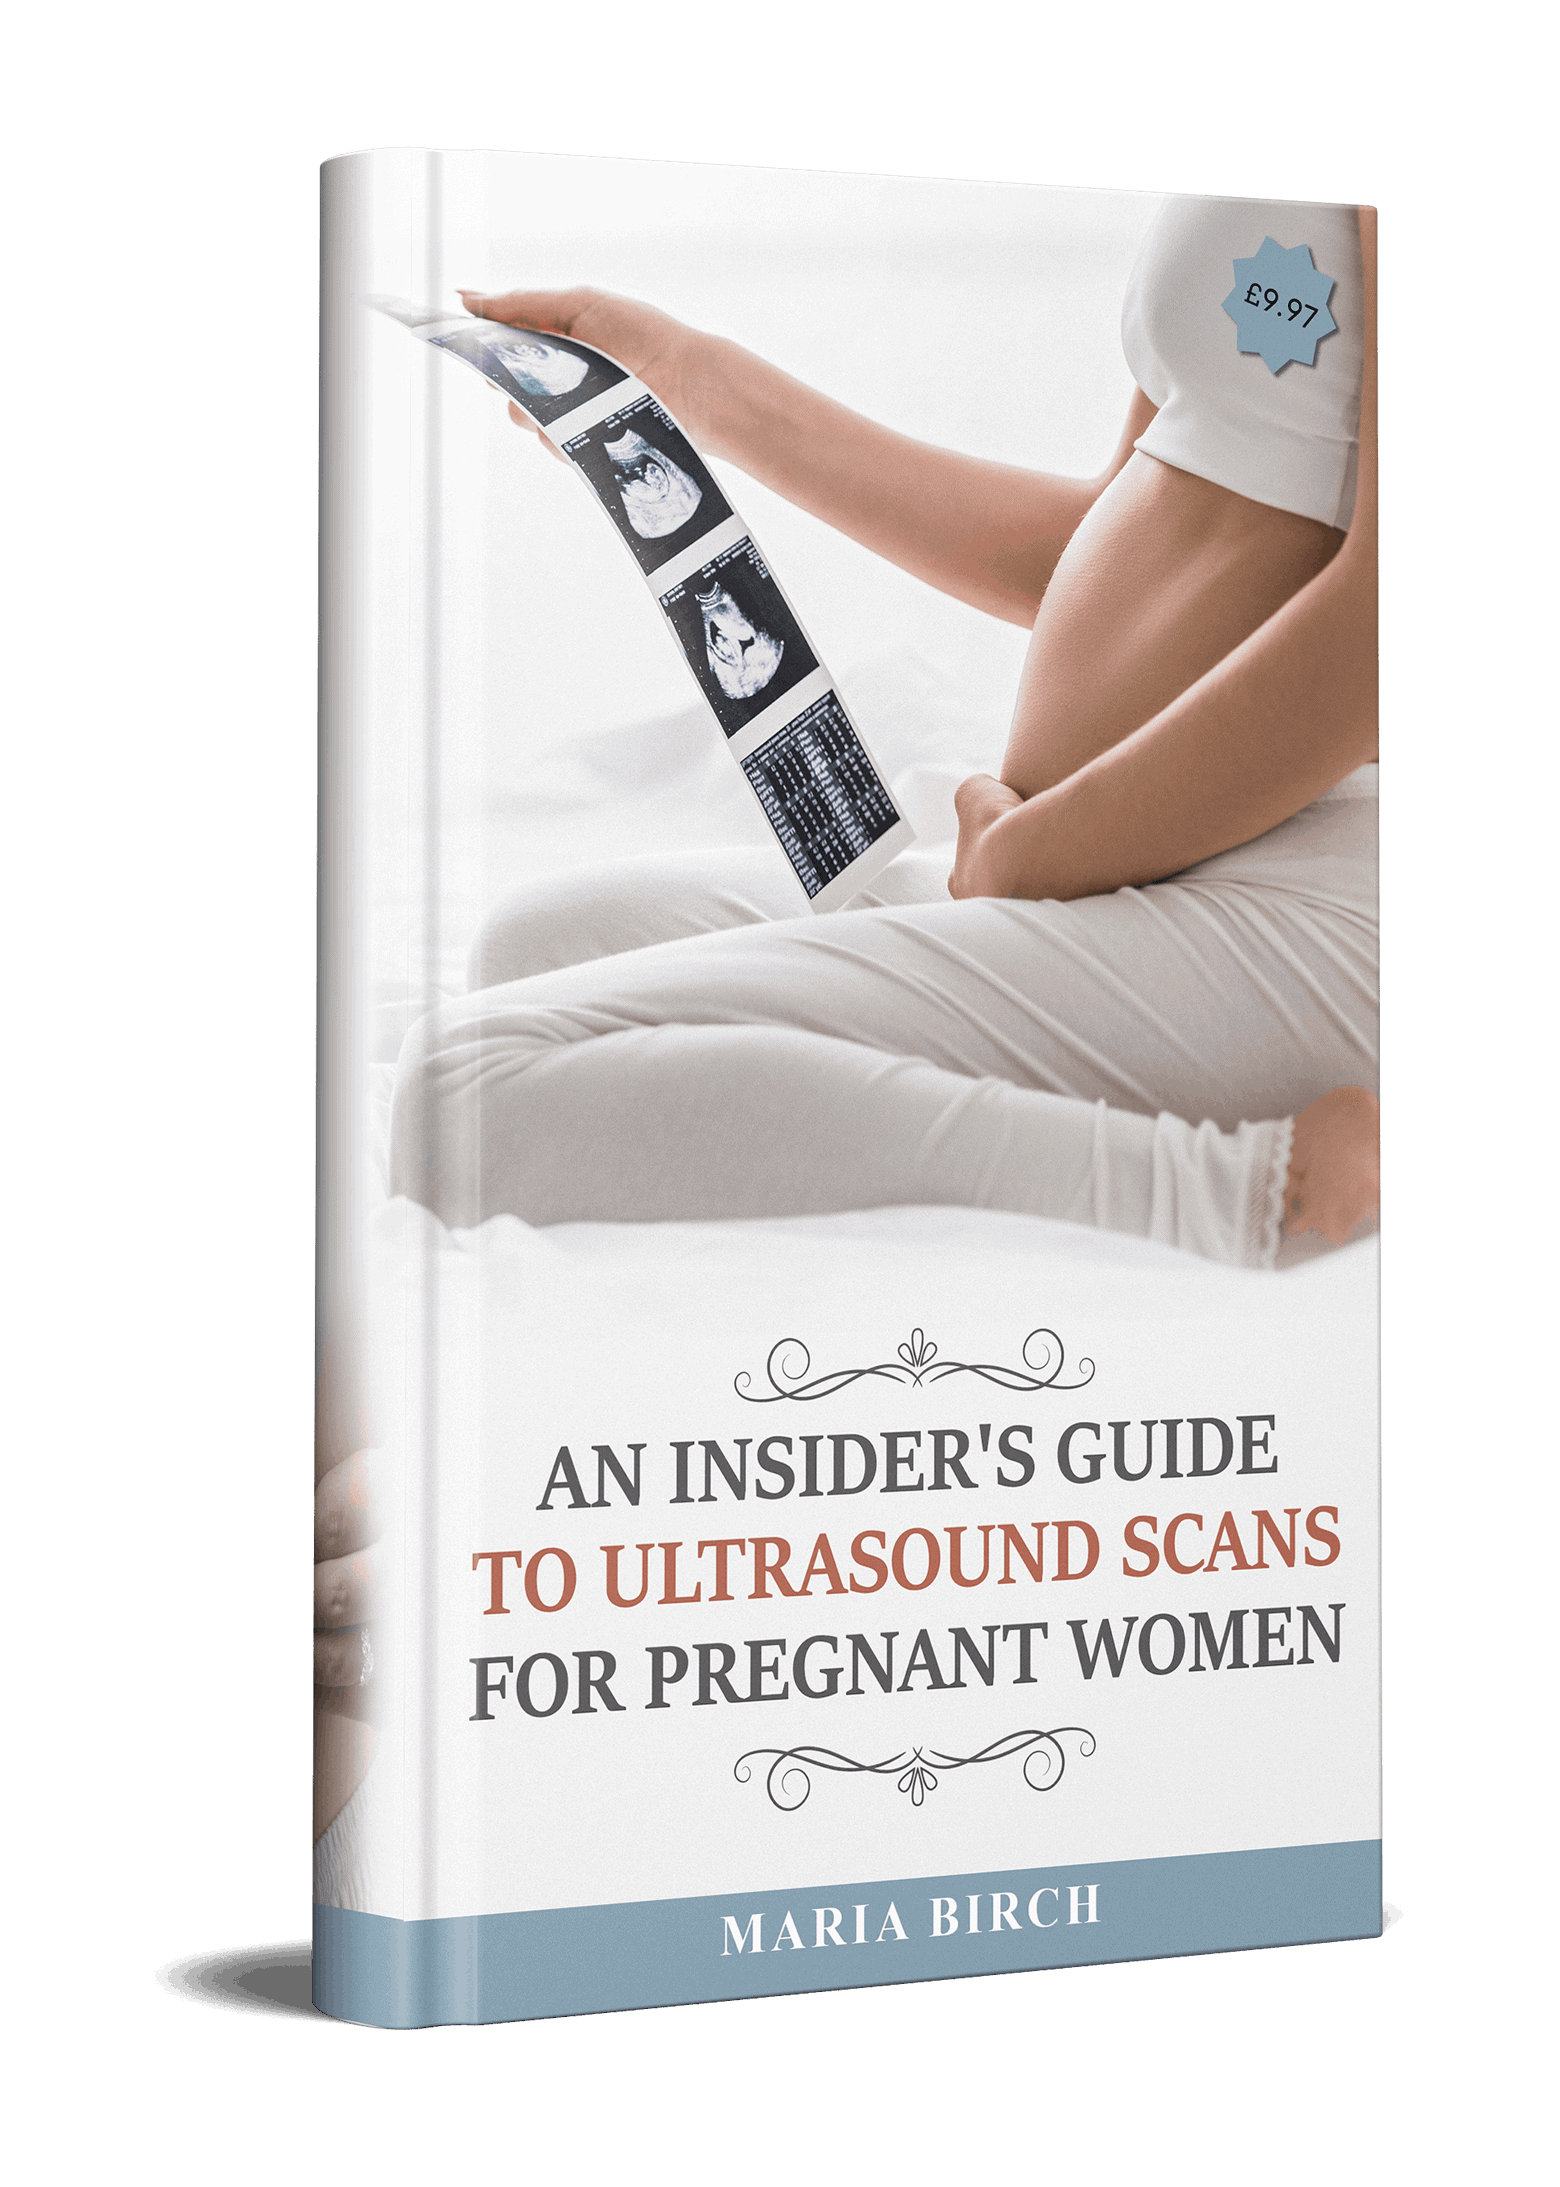 An Insider's Guide to Ultrasound Scans for Pregnant Women